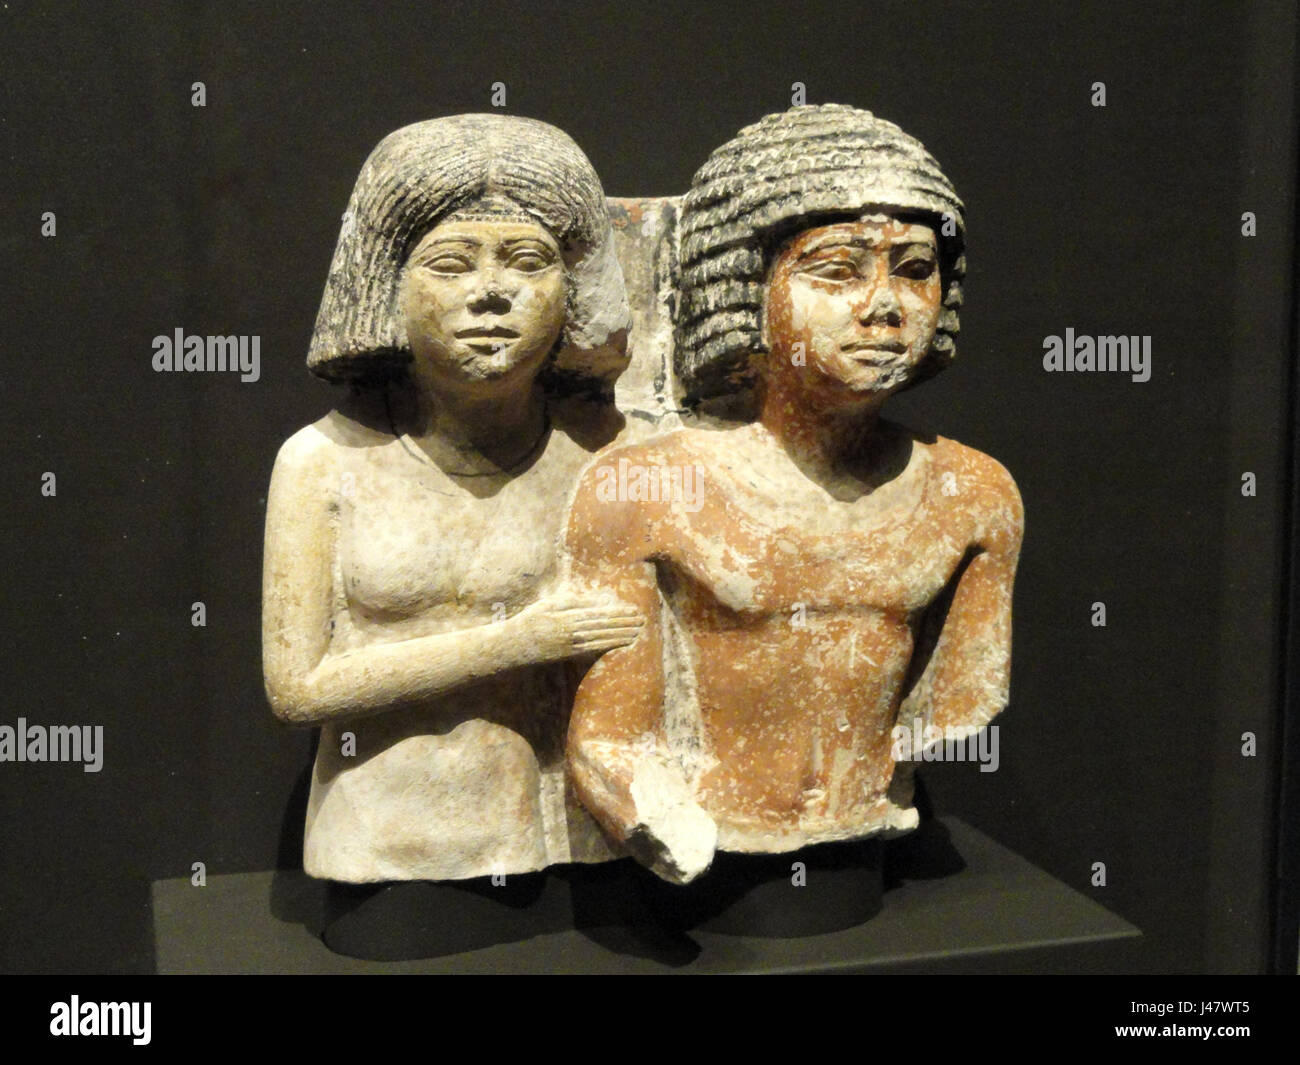 Nobleman and his wife, Egypt, Old Kingdom, 5th Dynasty, 2494 2345 BCE   Nelson Atkins Museum of Art   DSC08100 Stock Photo